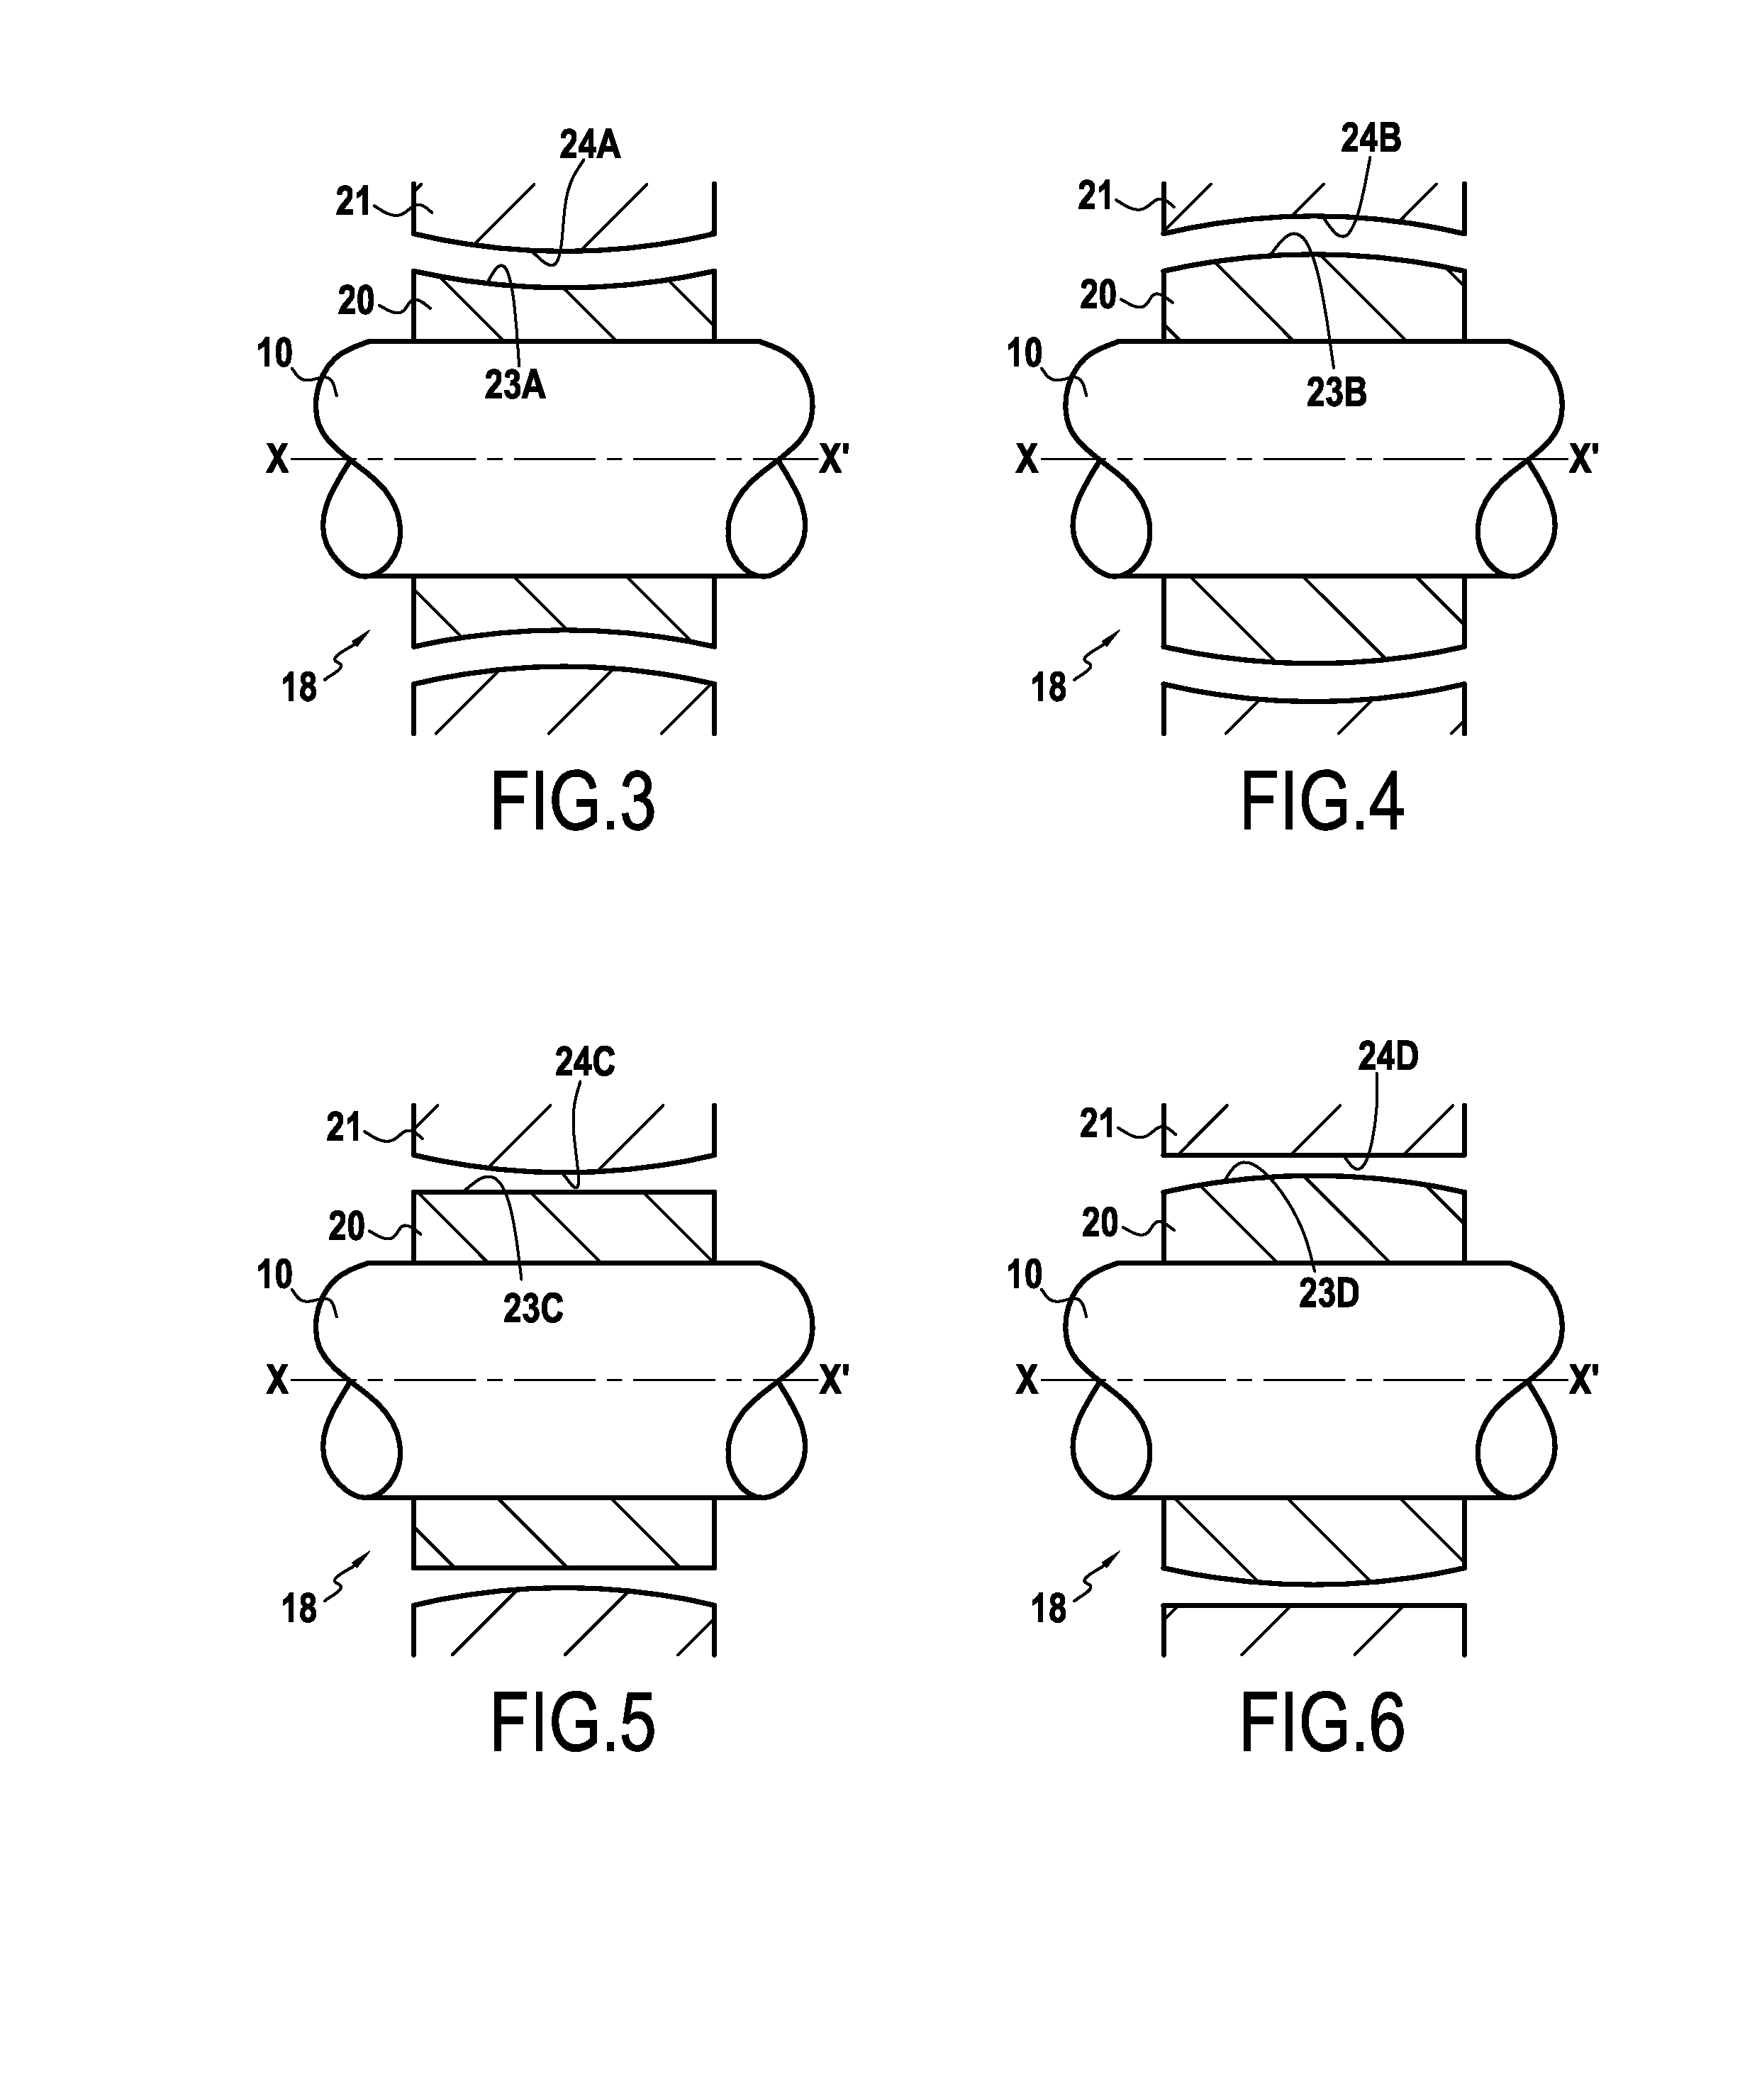 Auxiliary bearing for magnetically suspended rotor system